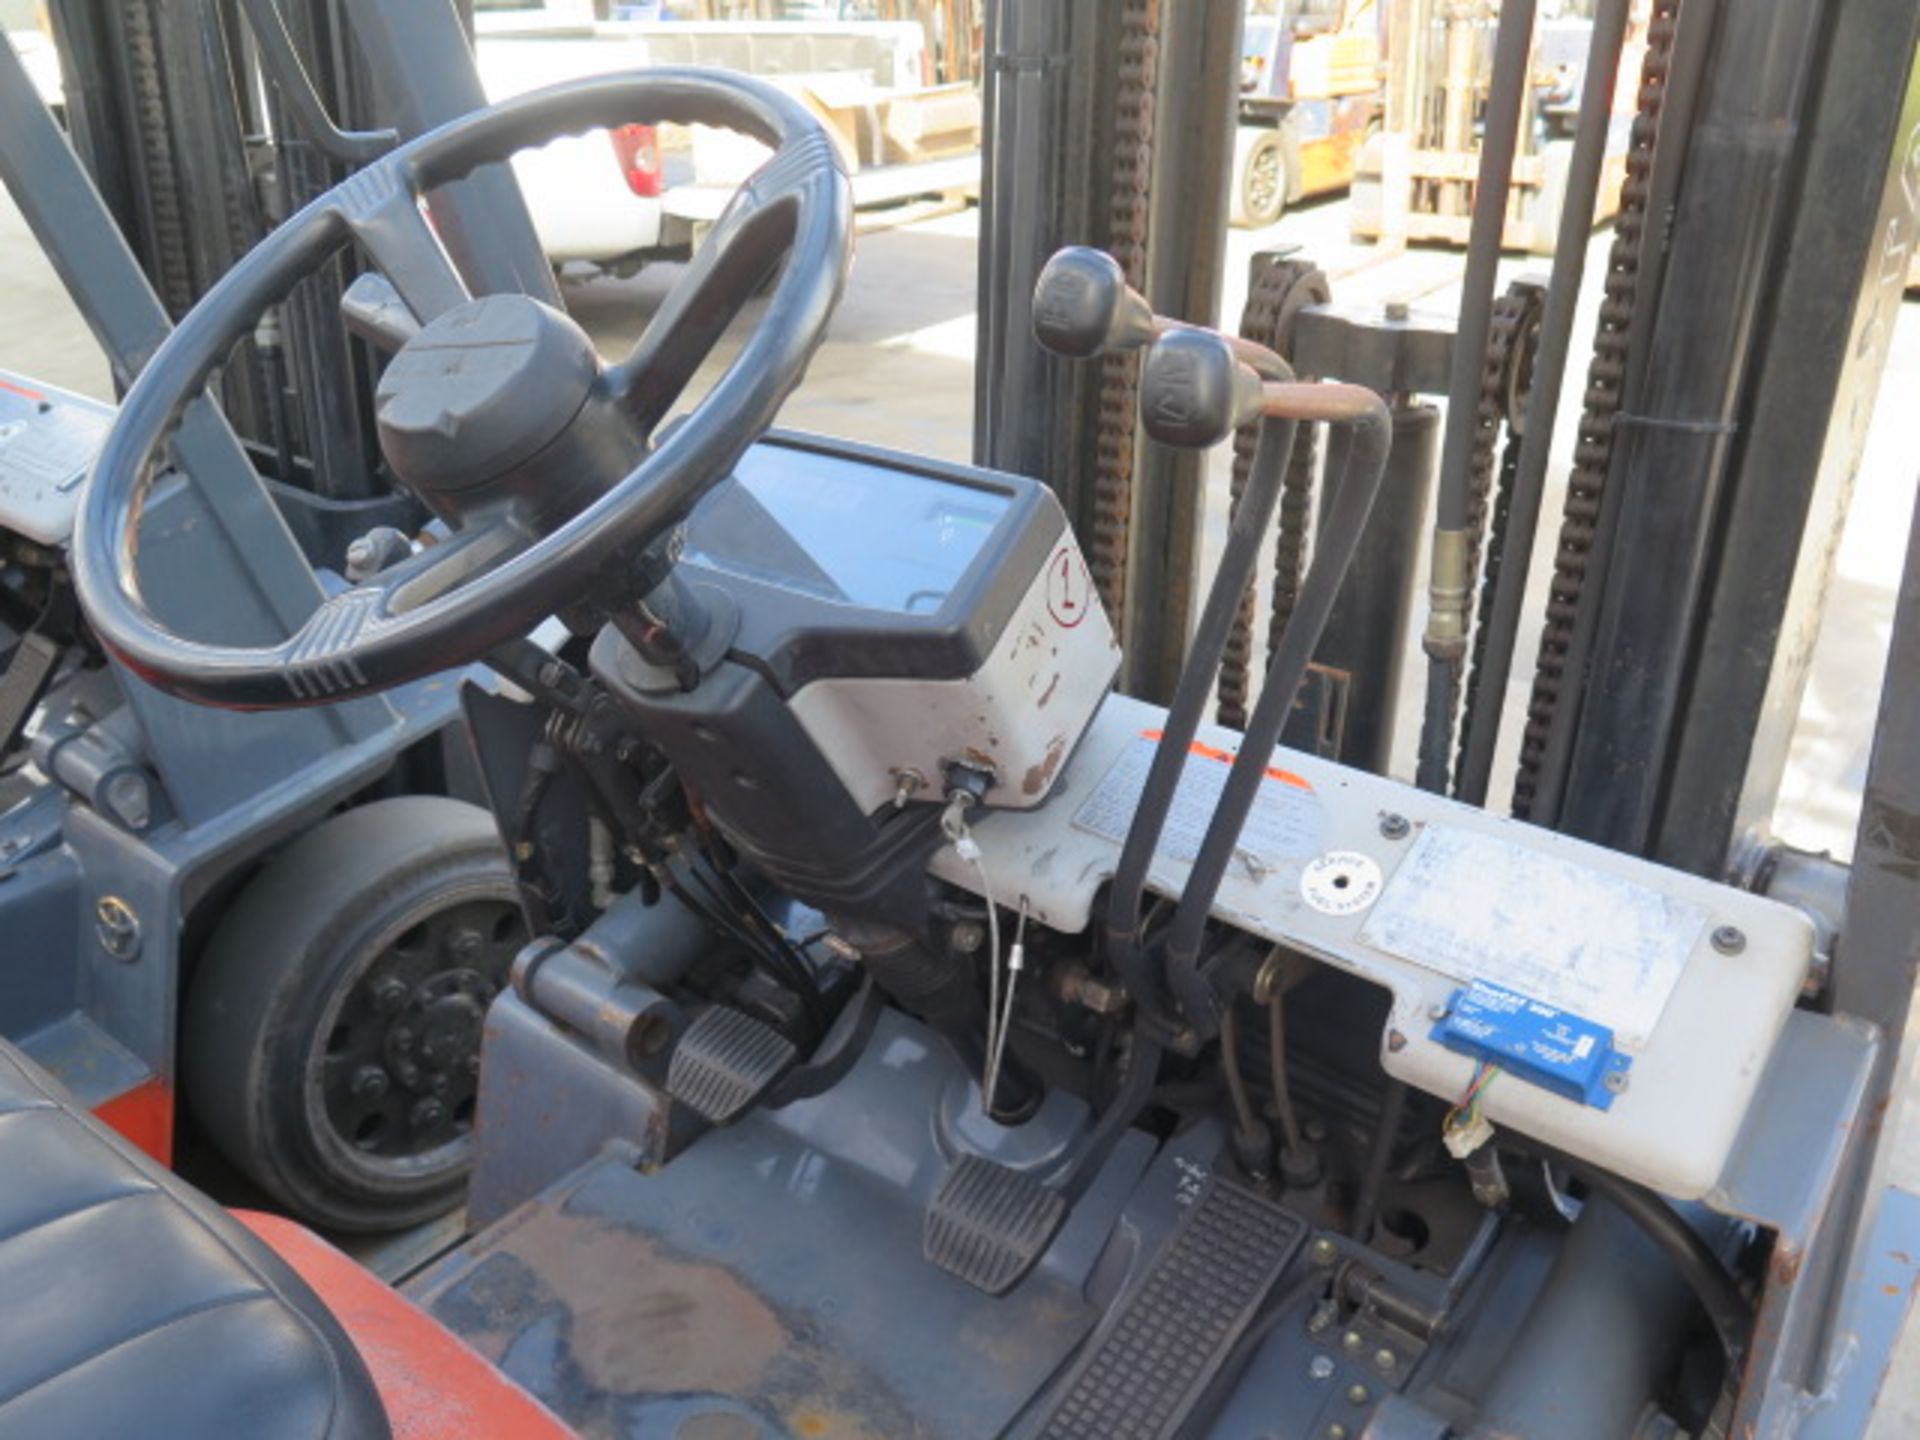 Toyota 5FGC25 5000 Lb Cap LPG Forklift s/n 5FGCU25-85121 w/ 3-Stage Mast, 185" Lift Height, - Image 7 of 11